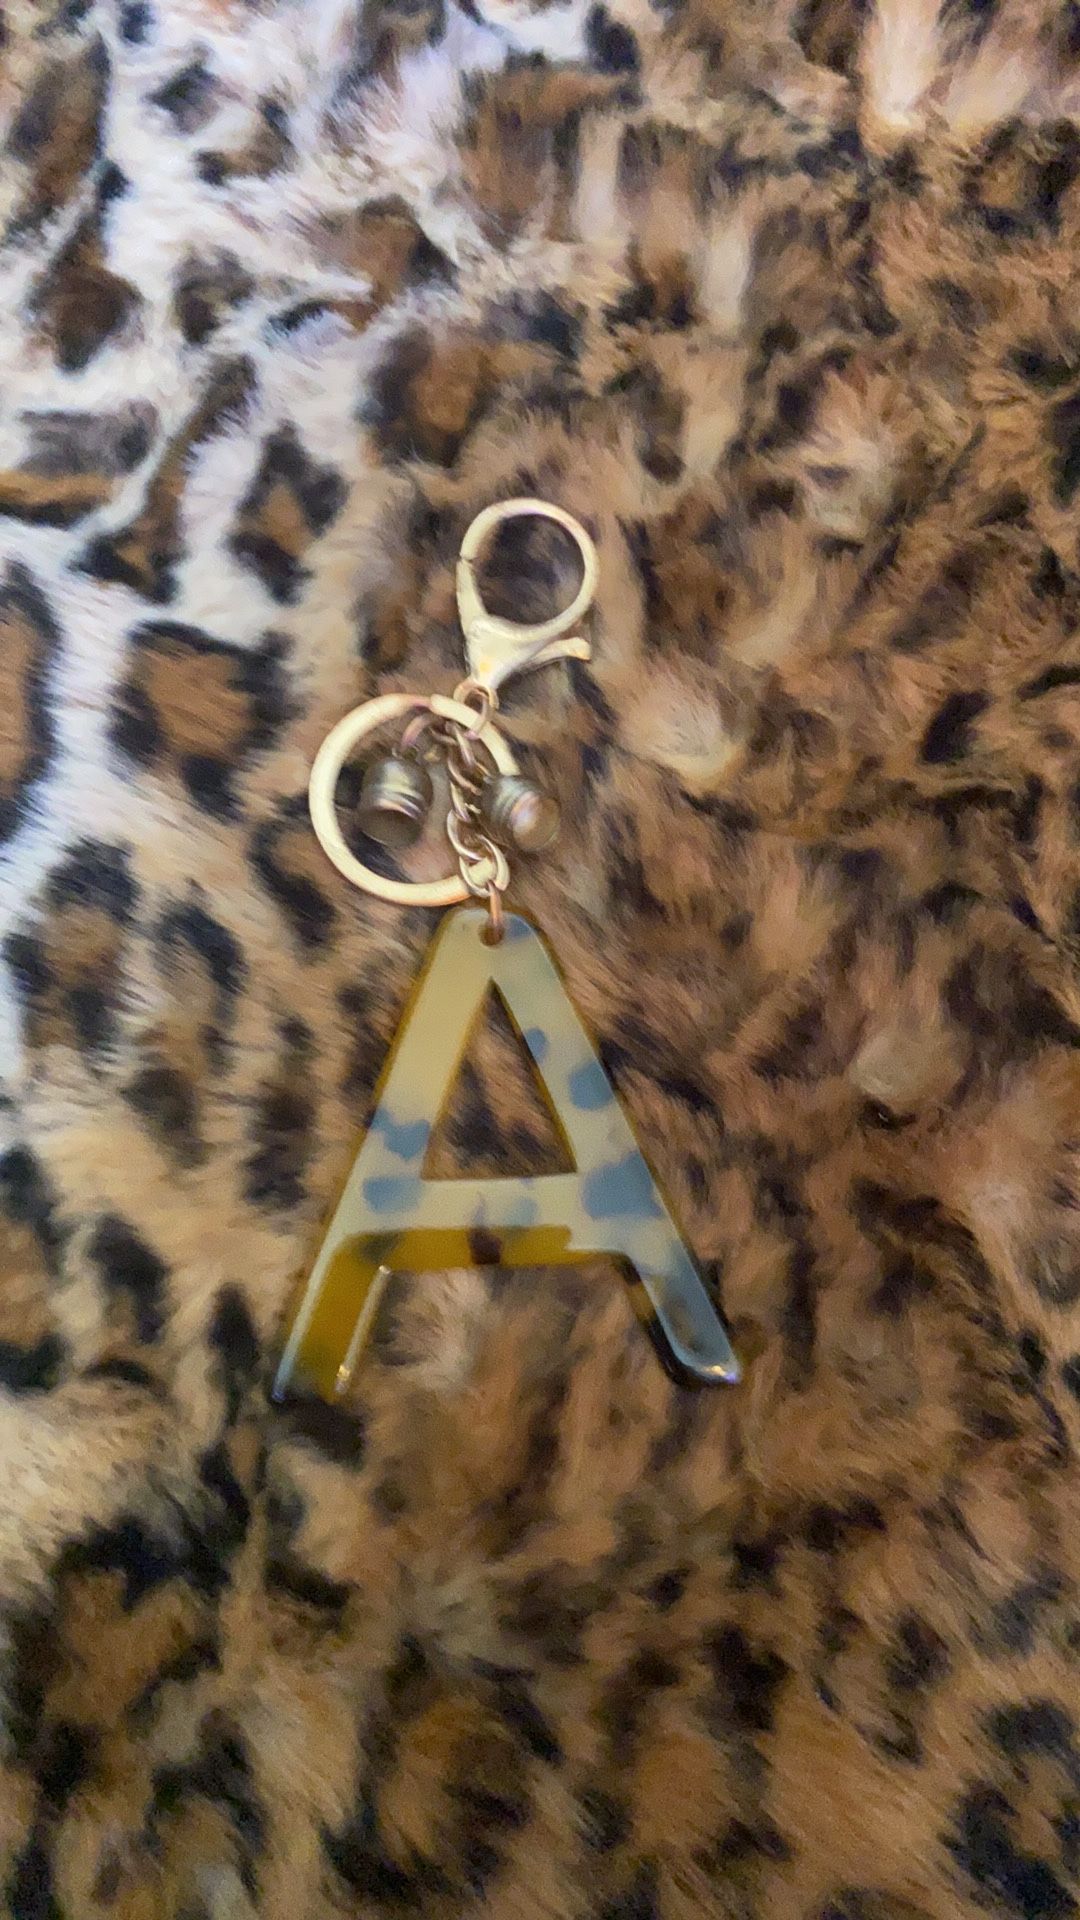 Keychain Letter A